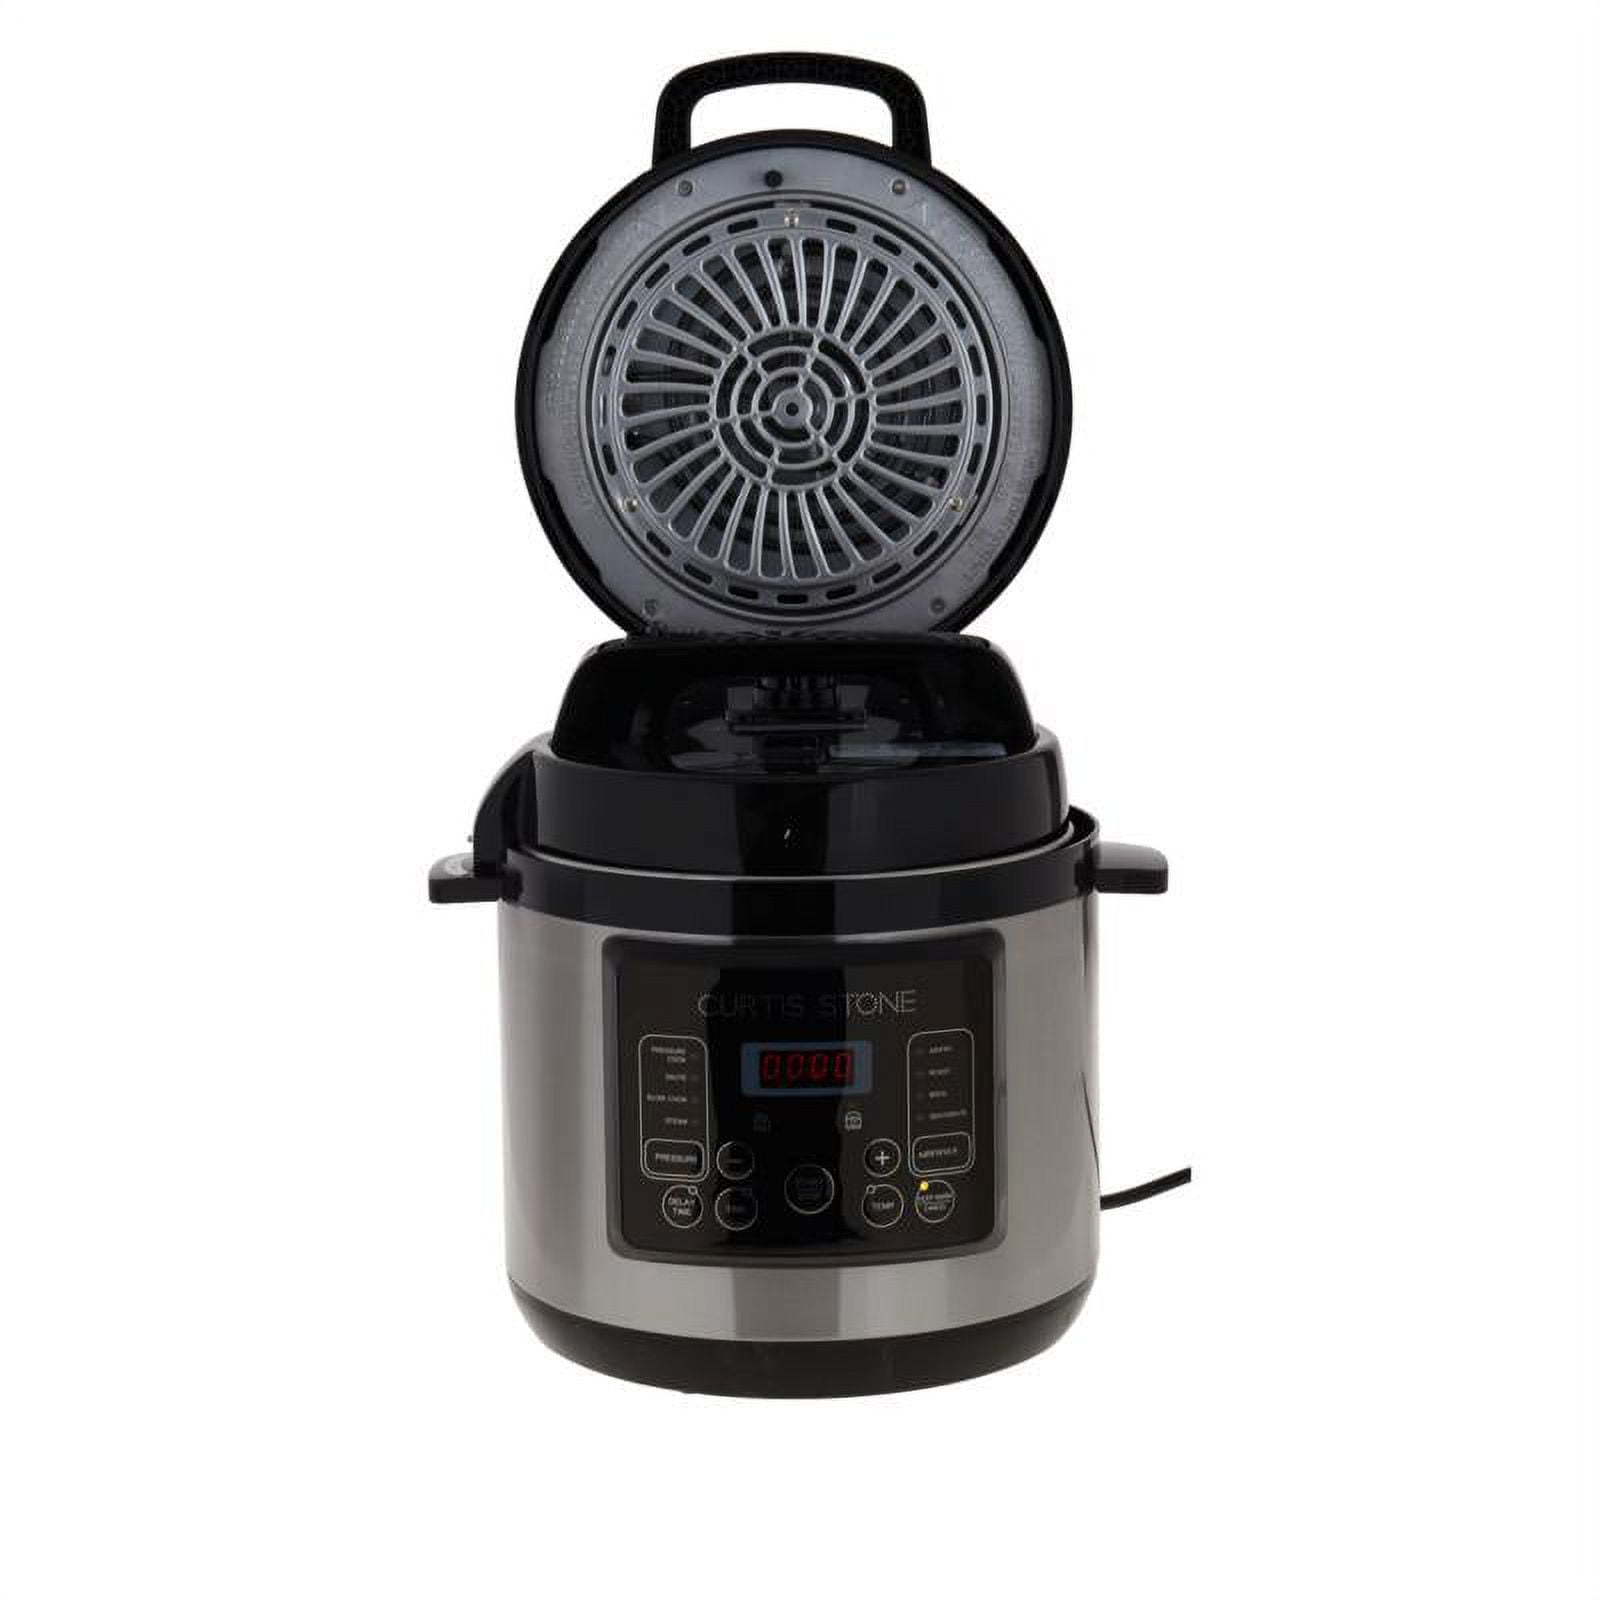 Commercial Electric Pressure Fryer – COOKROID